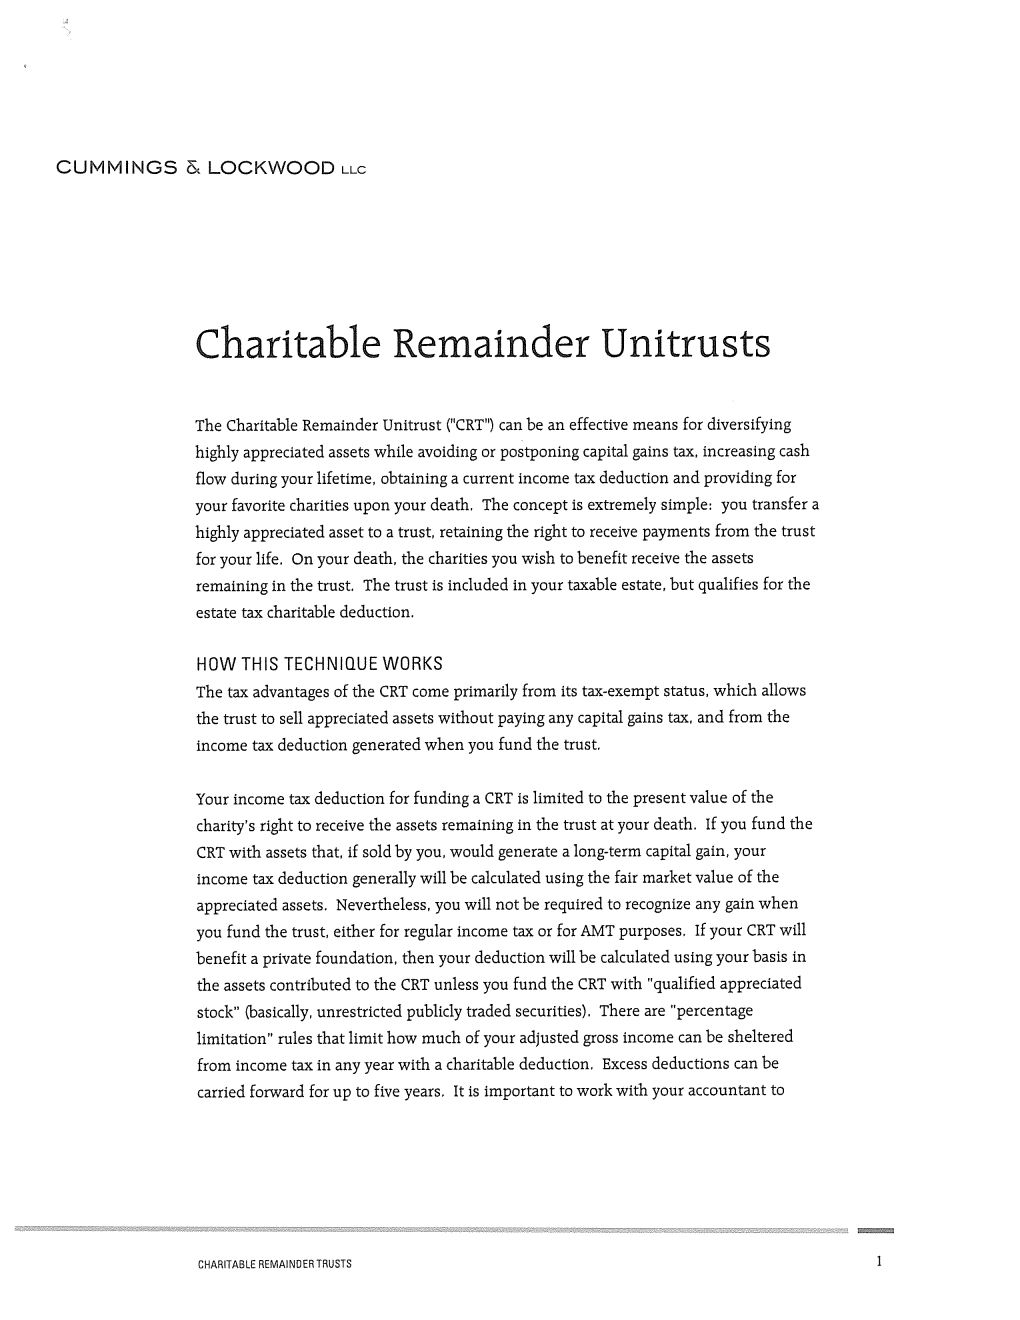 The Charitable Remainder Unitrust 'CRT') Can Be an Effective Means For